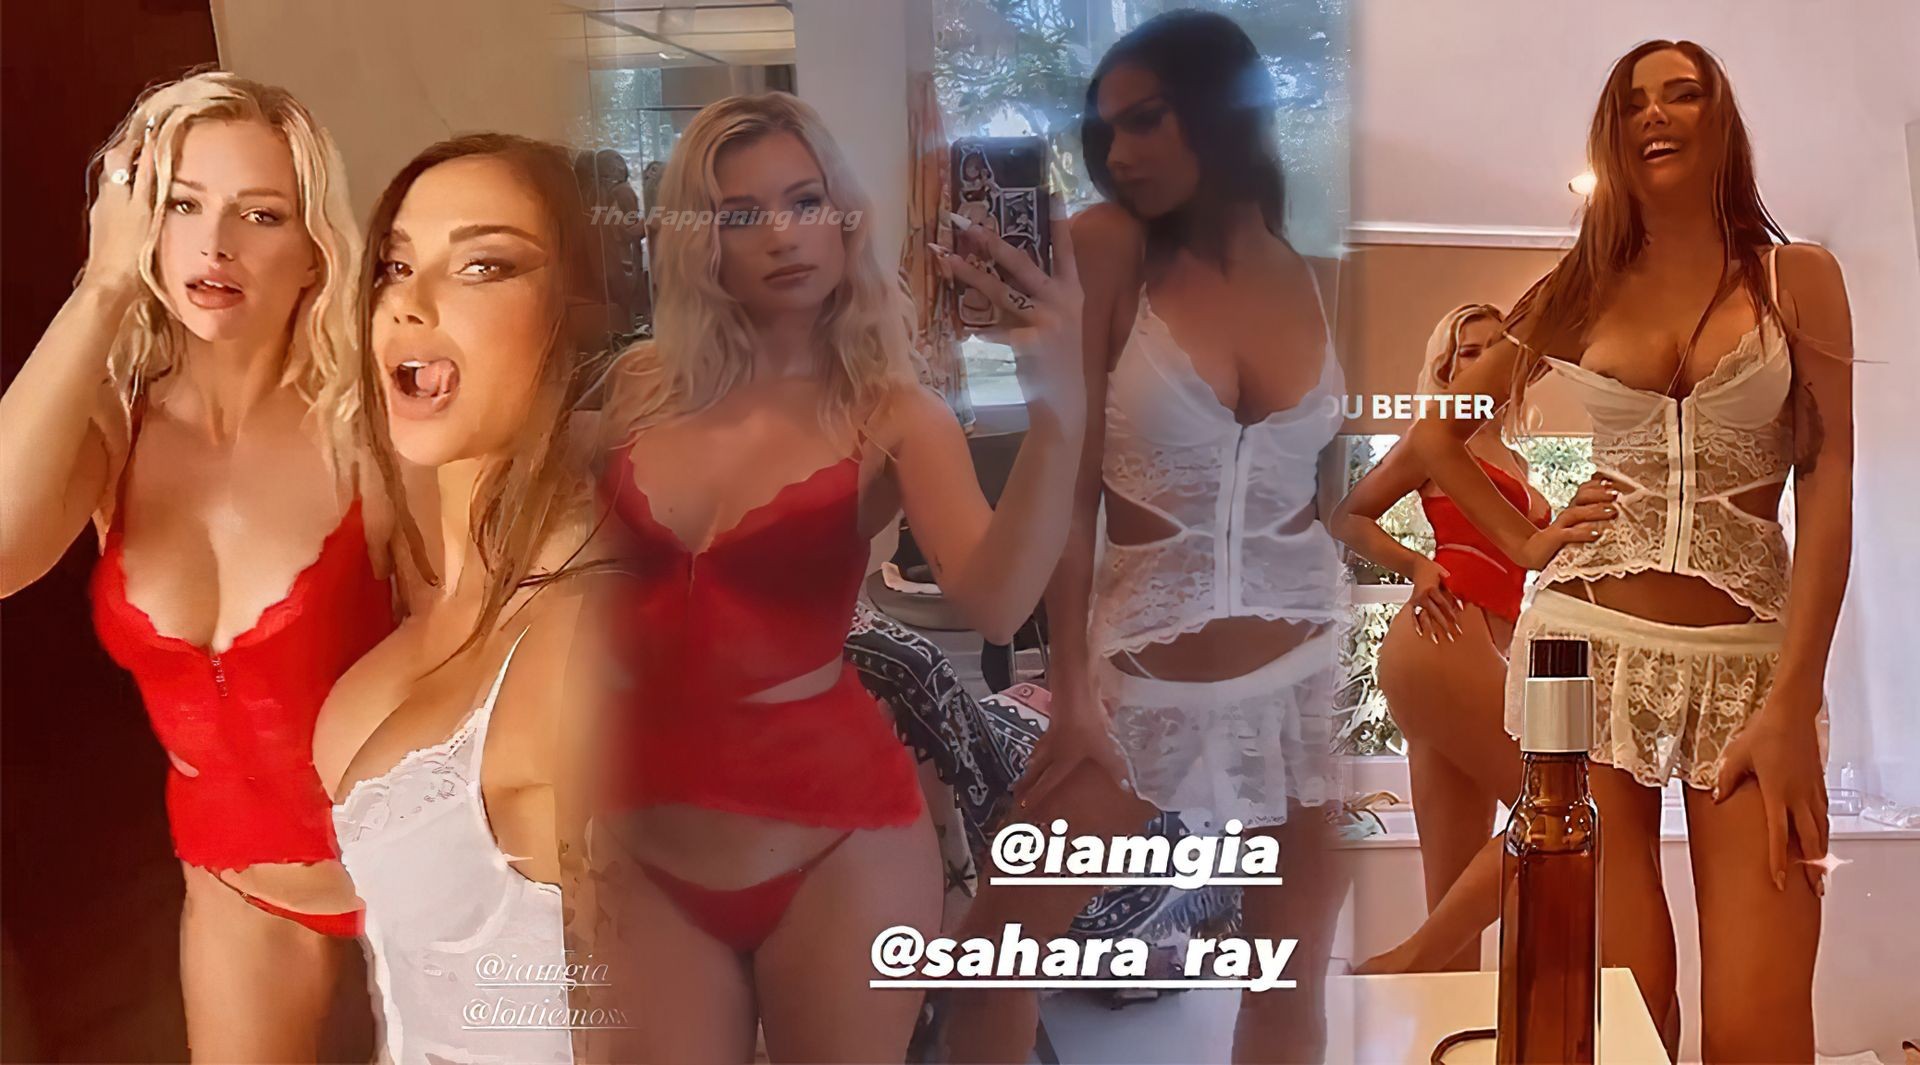 Lottie Moss & Sahara Ray Show Their Tits in Lingerie (14 Pics + Video)